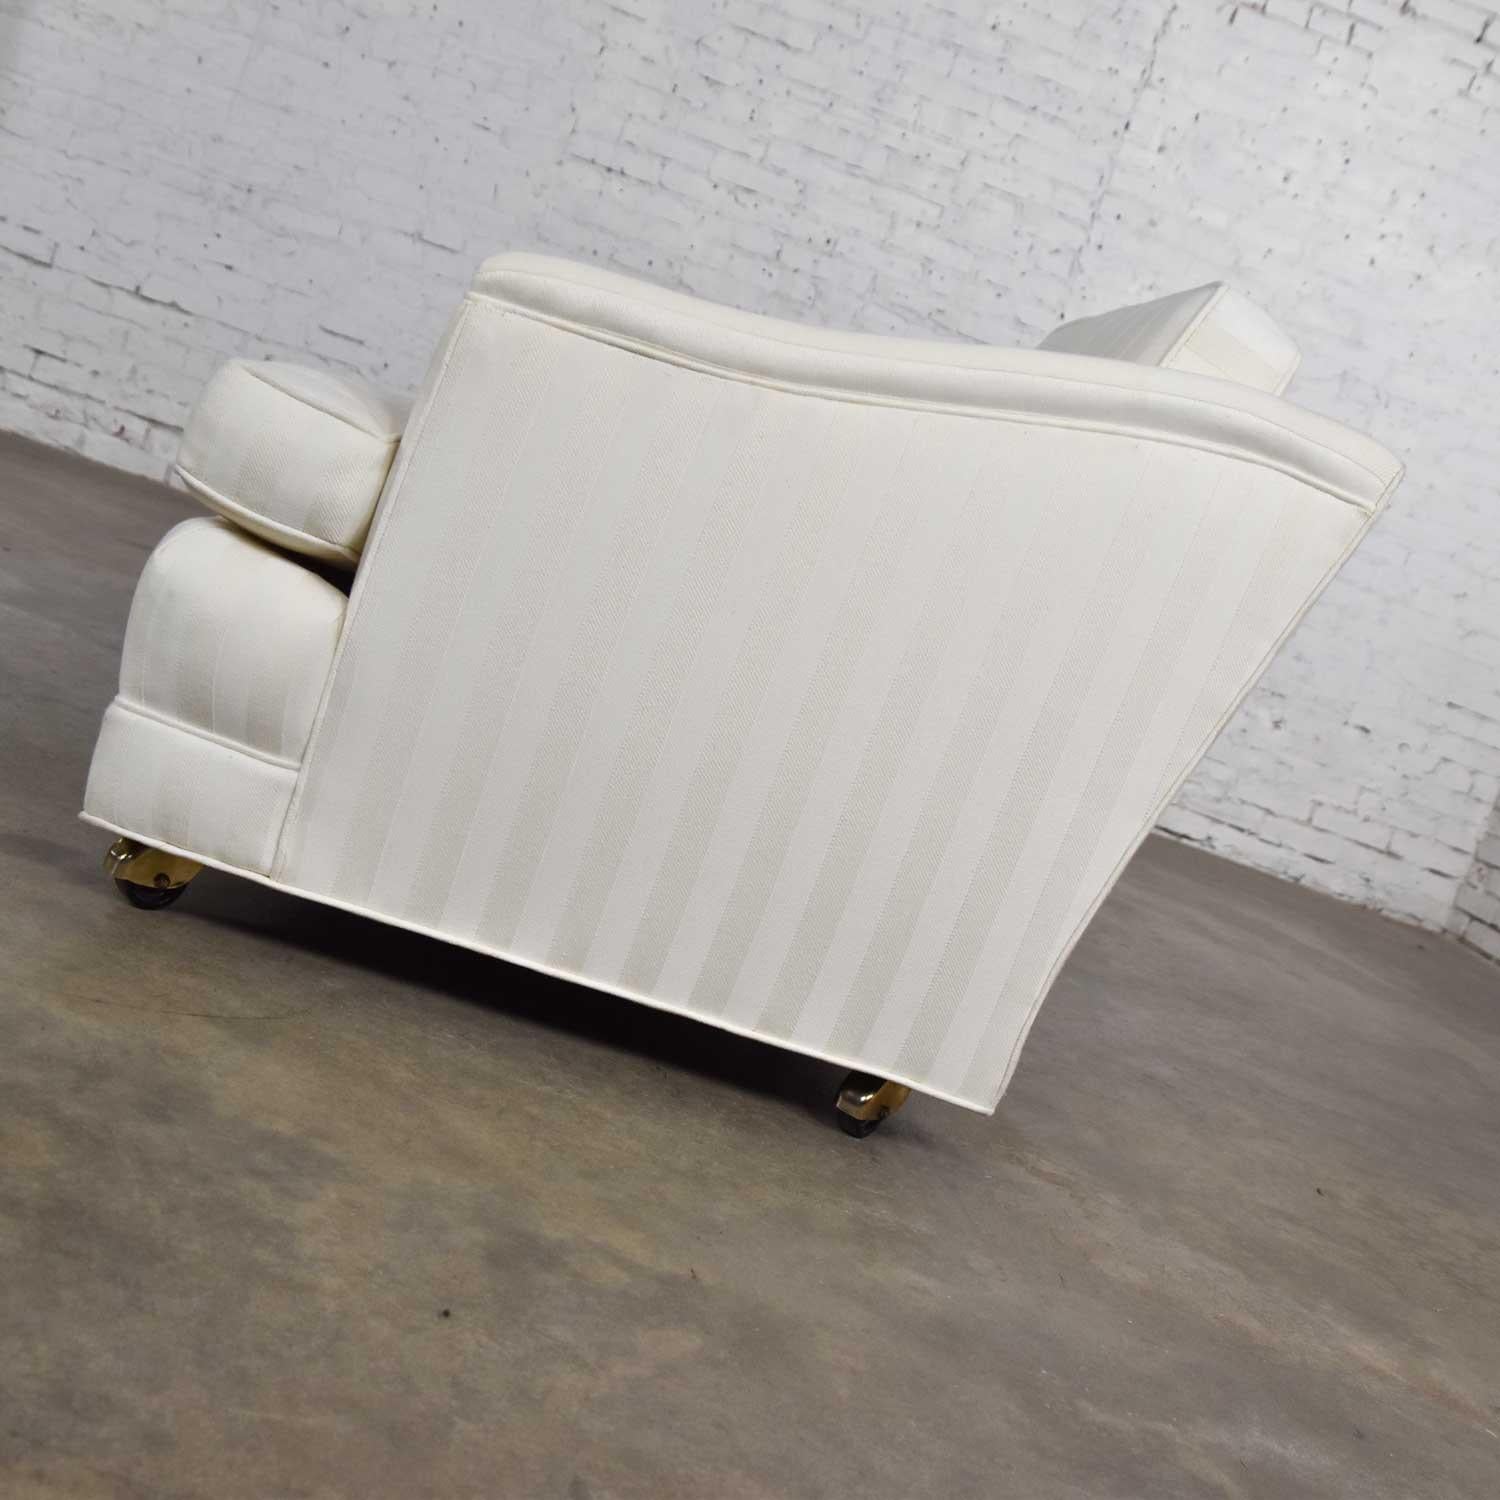 Mid-Century Modern Off White Tone on Tone Stripe Lounge Chair on Rolling Casters For Sale 1